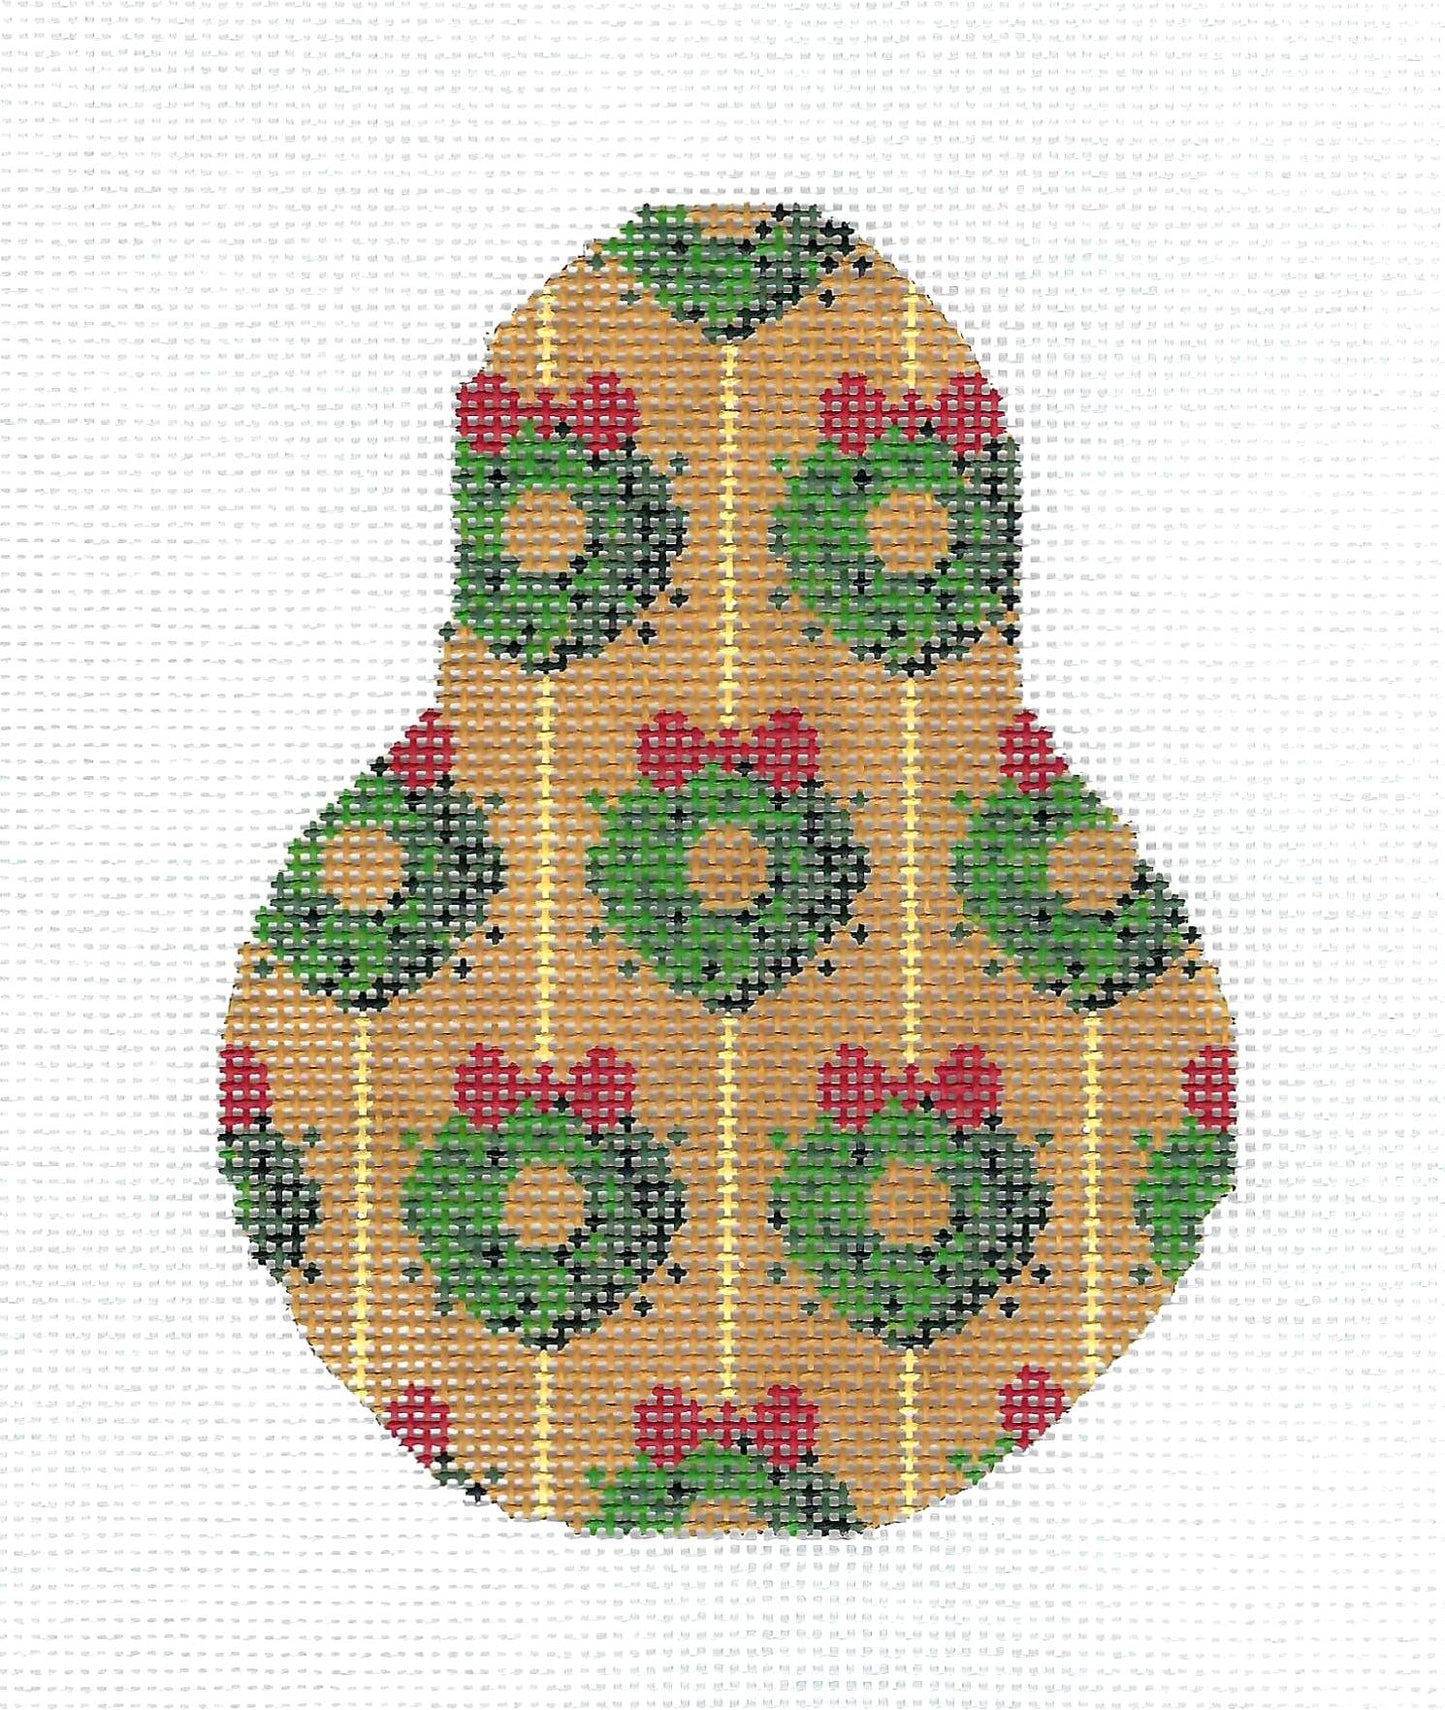 Pear ~ Wreaths on a Golden Pear Ornament handpainted Needlepoint Canvas by Kelly Clark